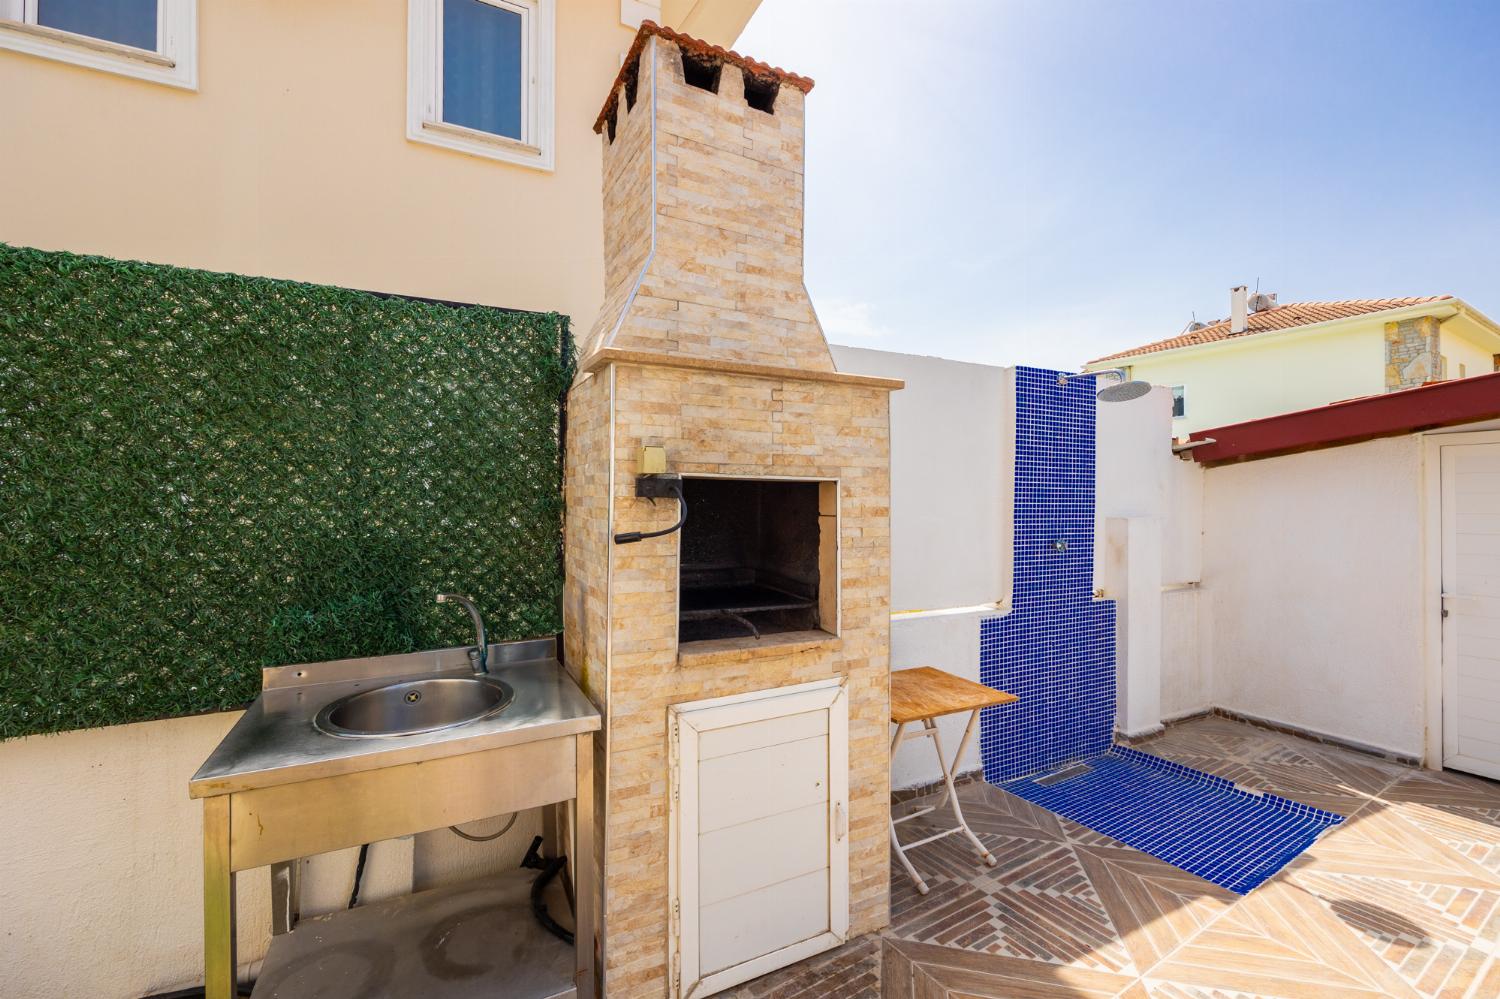 Terrace area with BBQ and outdoor shower